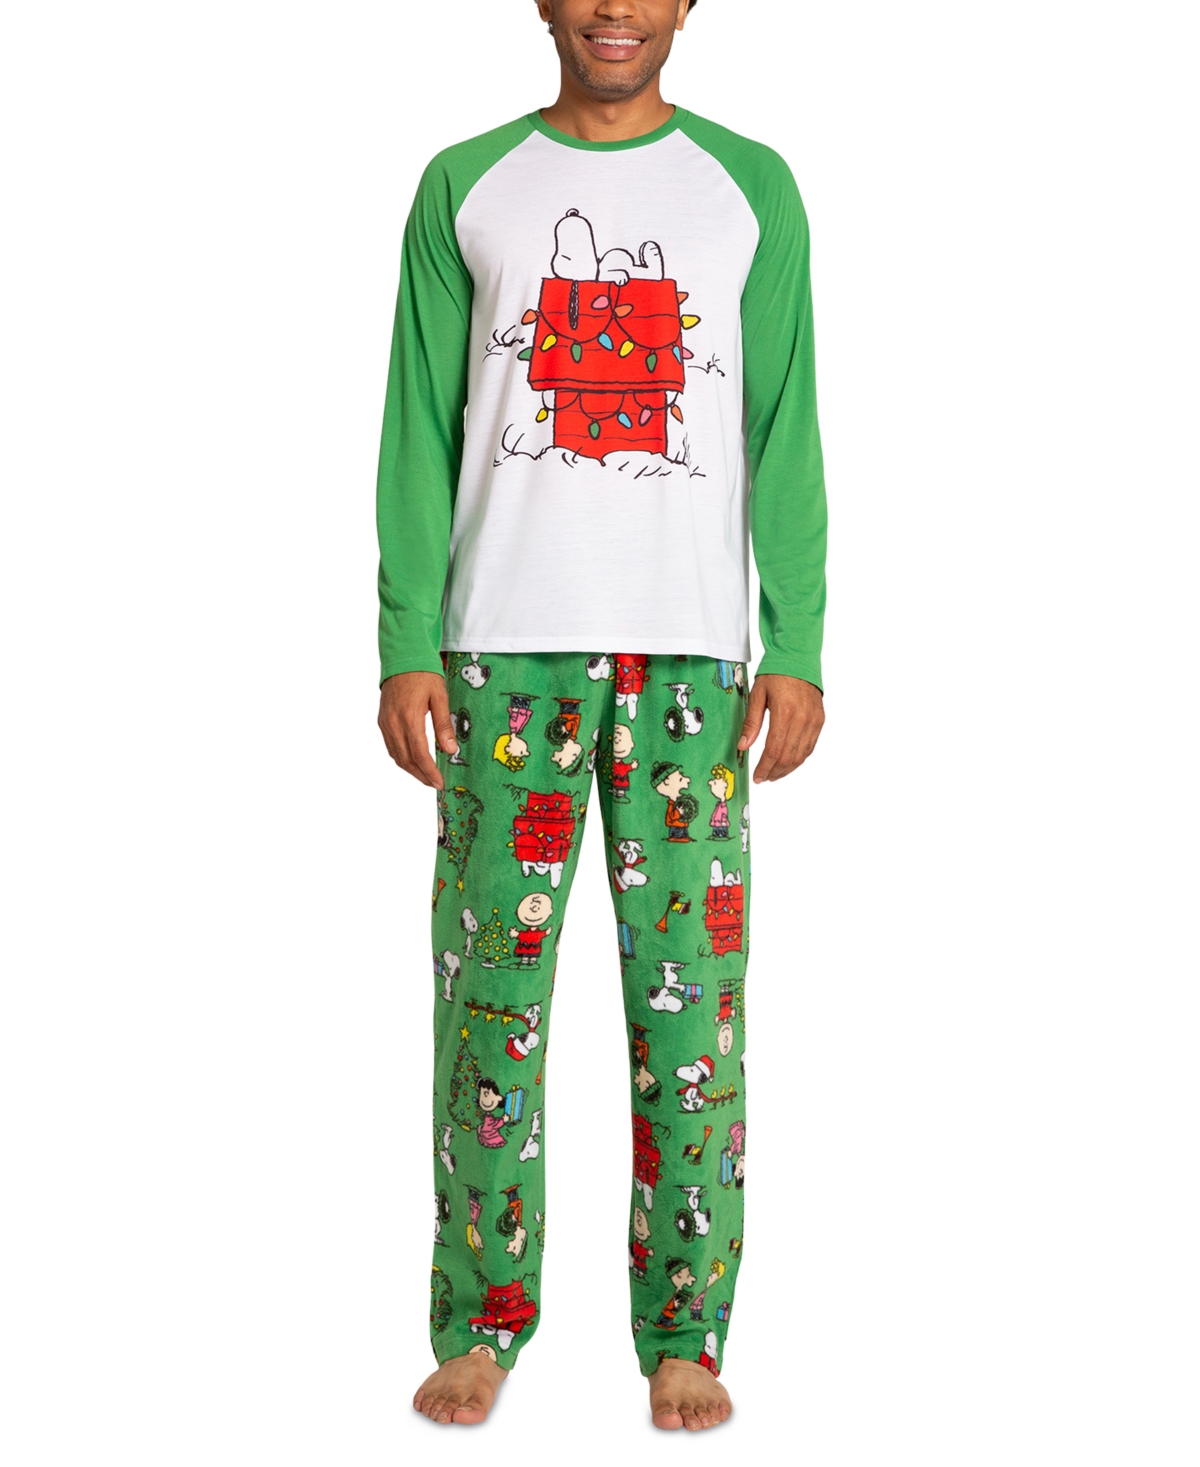 Briefly Stated Matching Men's Peanuts Raglan-sleeve Top And Pajama Pants Set In Green